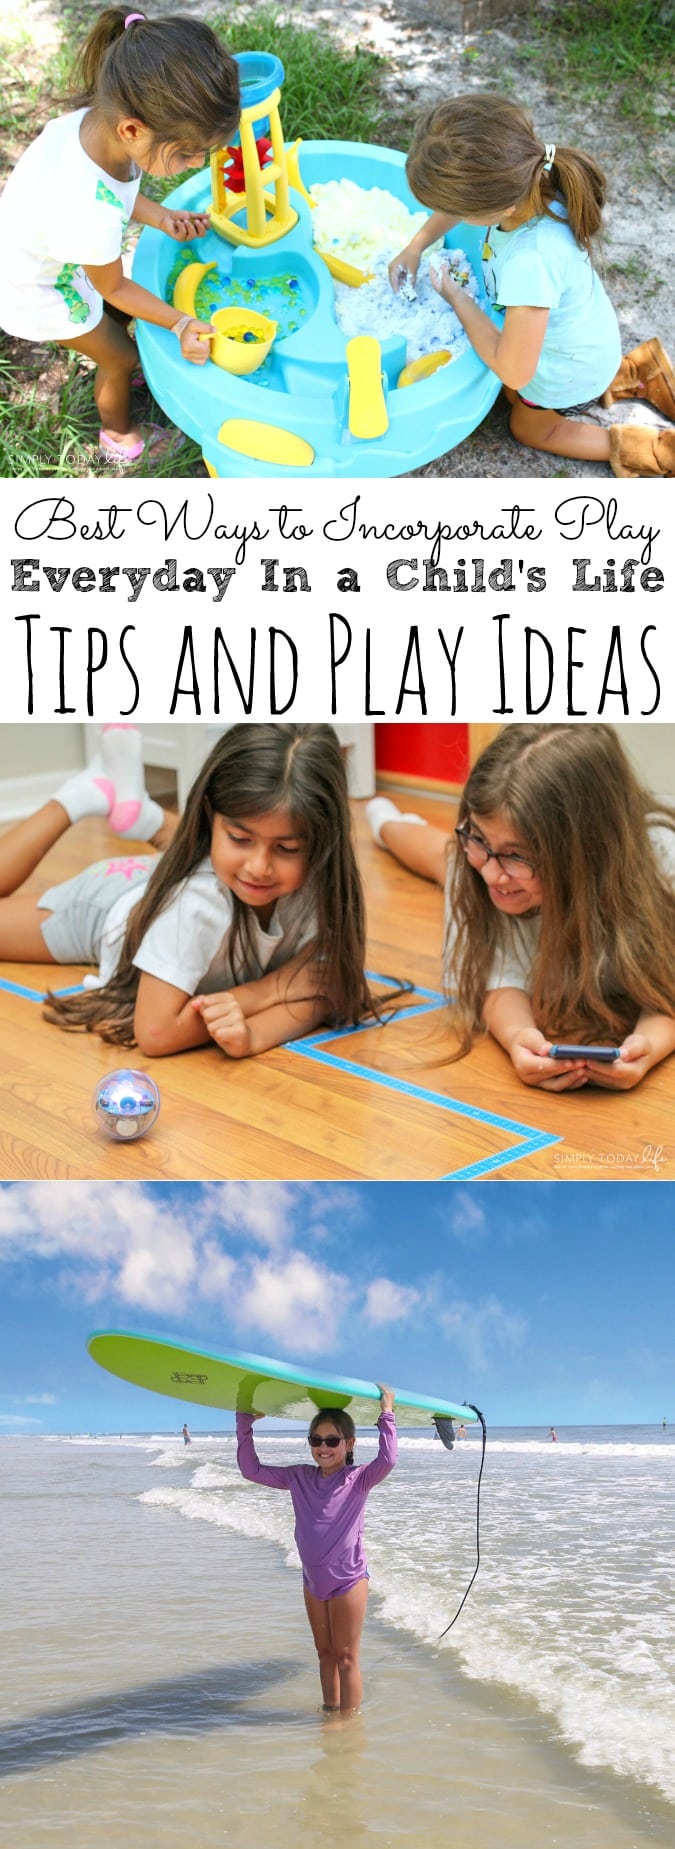 Best Ways To Incorporate Play Every Day In Your Child's Life | Tips and Play Ideas